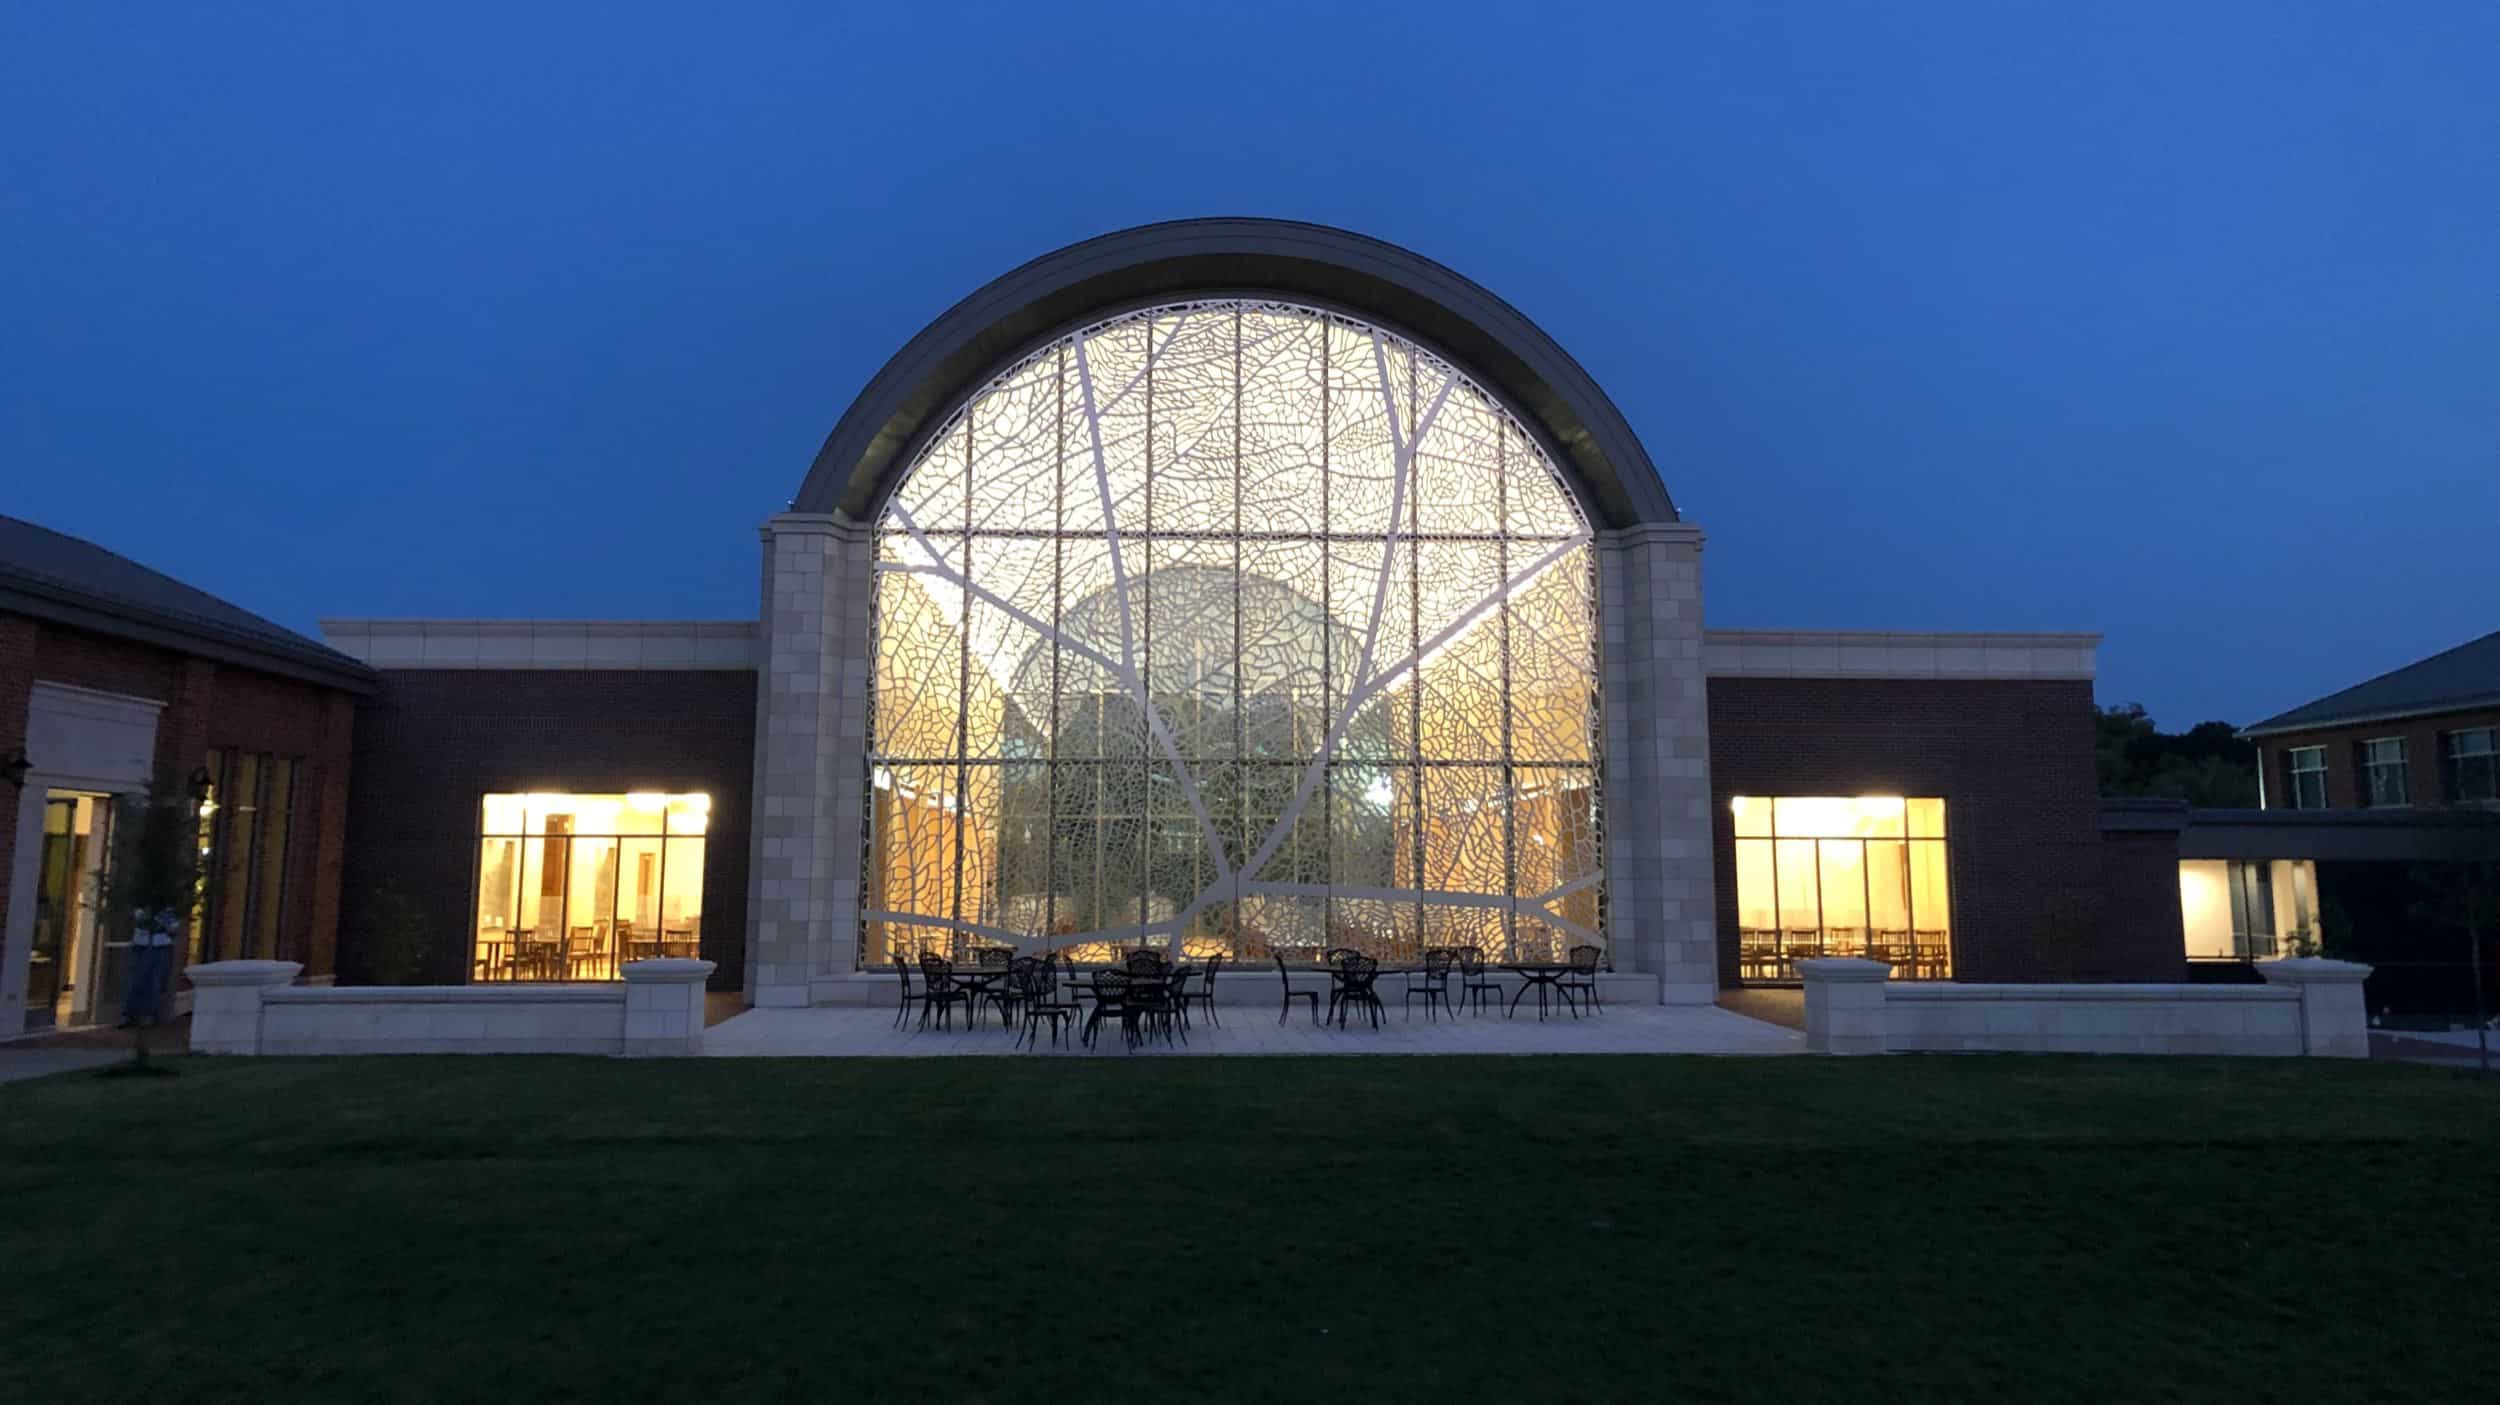 A nighttime view of Pembroke Hill preparatory school's barrel-vaulted dining hall, which features artwork by Dutch artist Jan Hendrix, fabricated by Zahner.